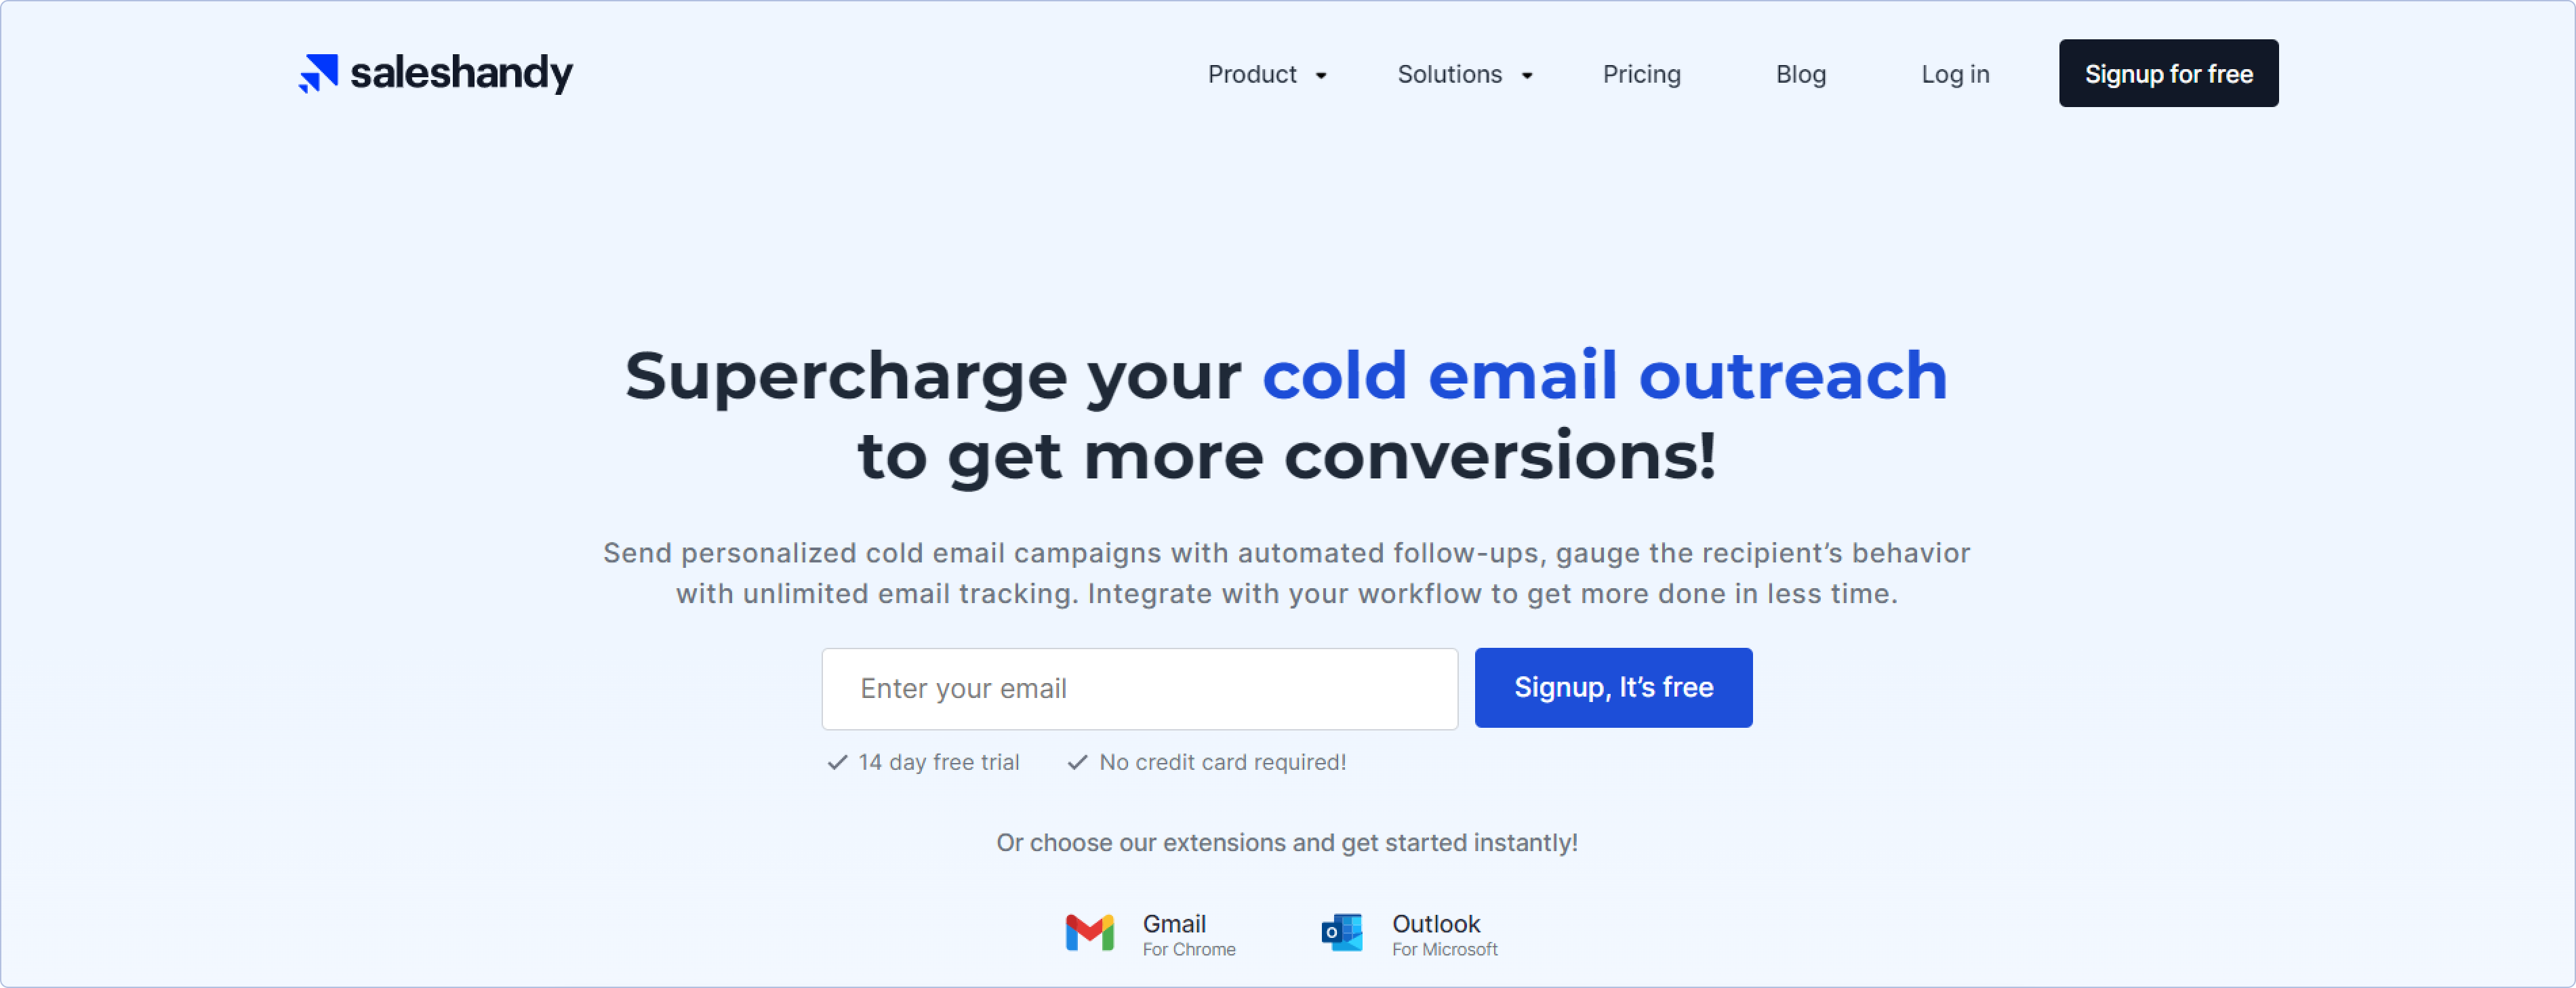 Cold email software: 29 Best tools to automate your outreach